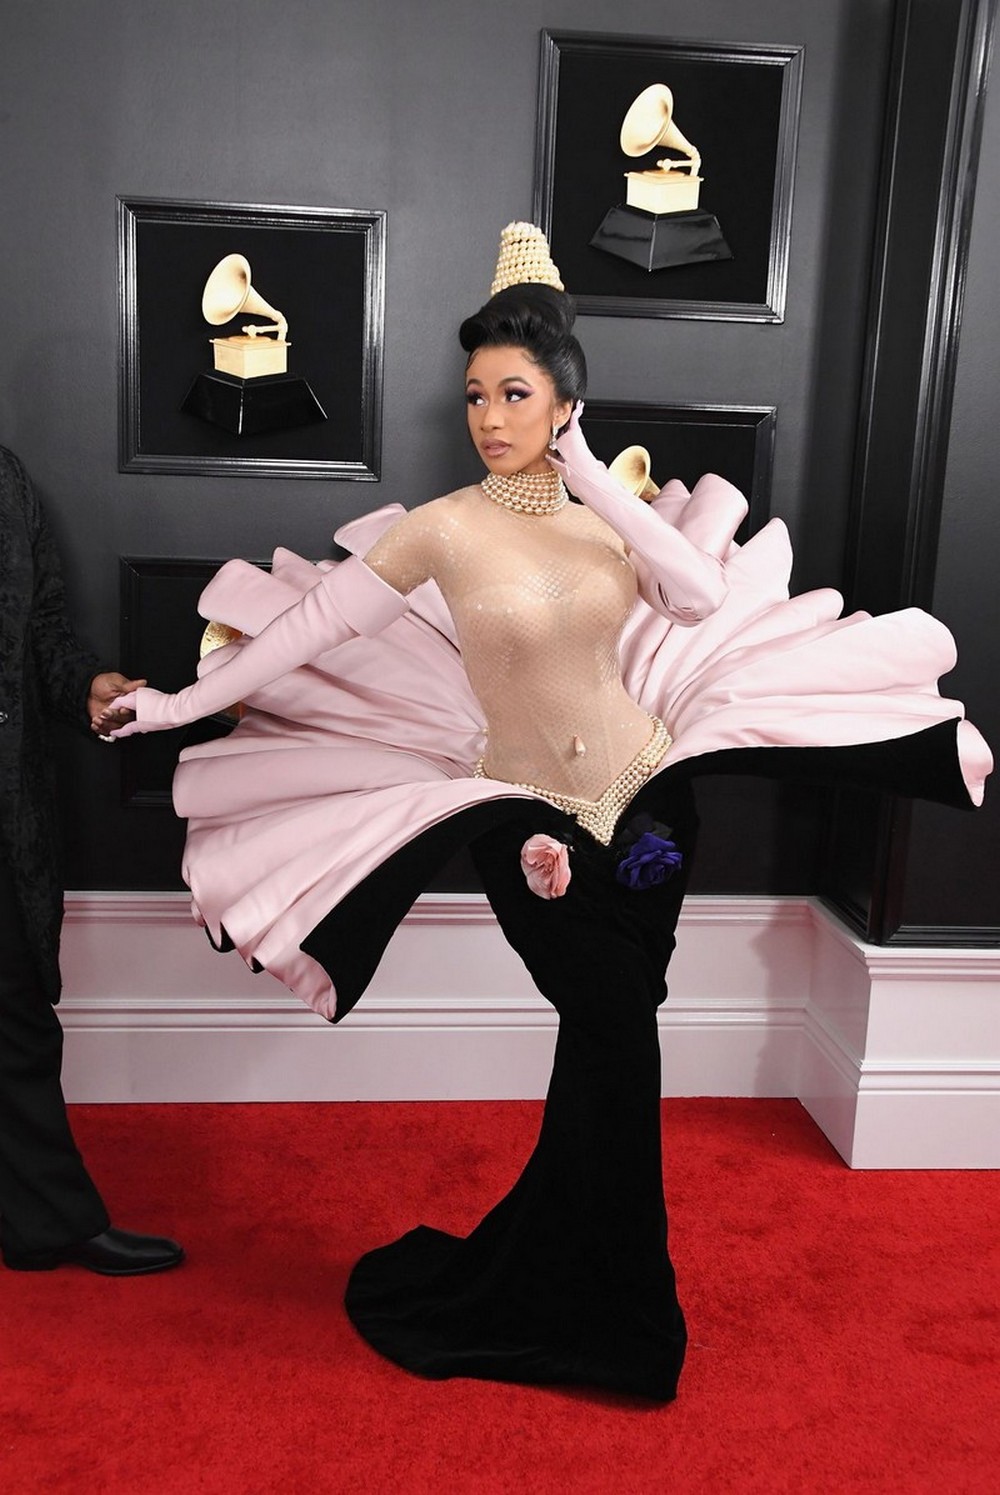 CovetED Reveals The Best High-Fashion Looks Of The 2019 Grammys